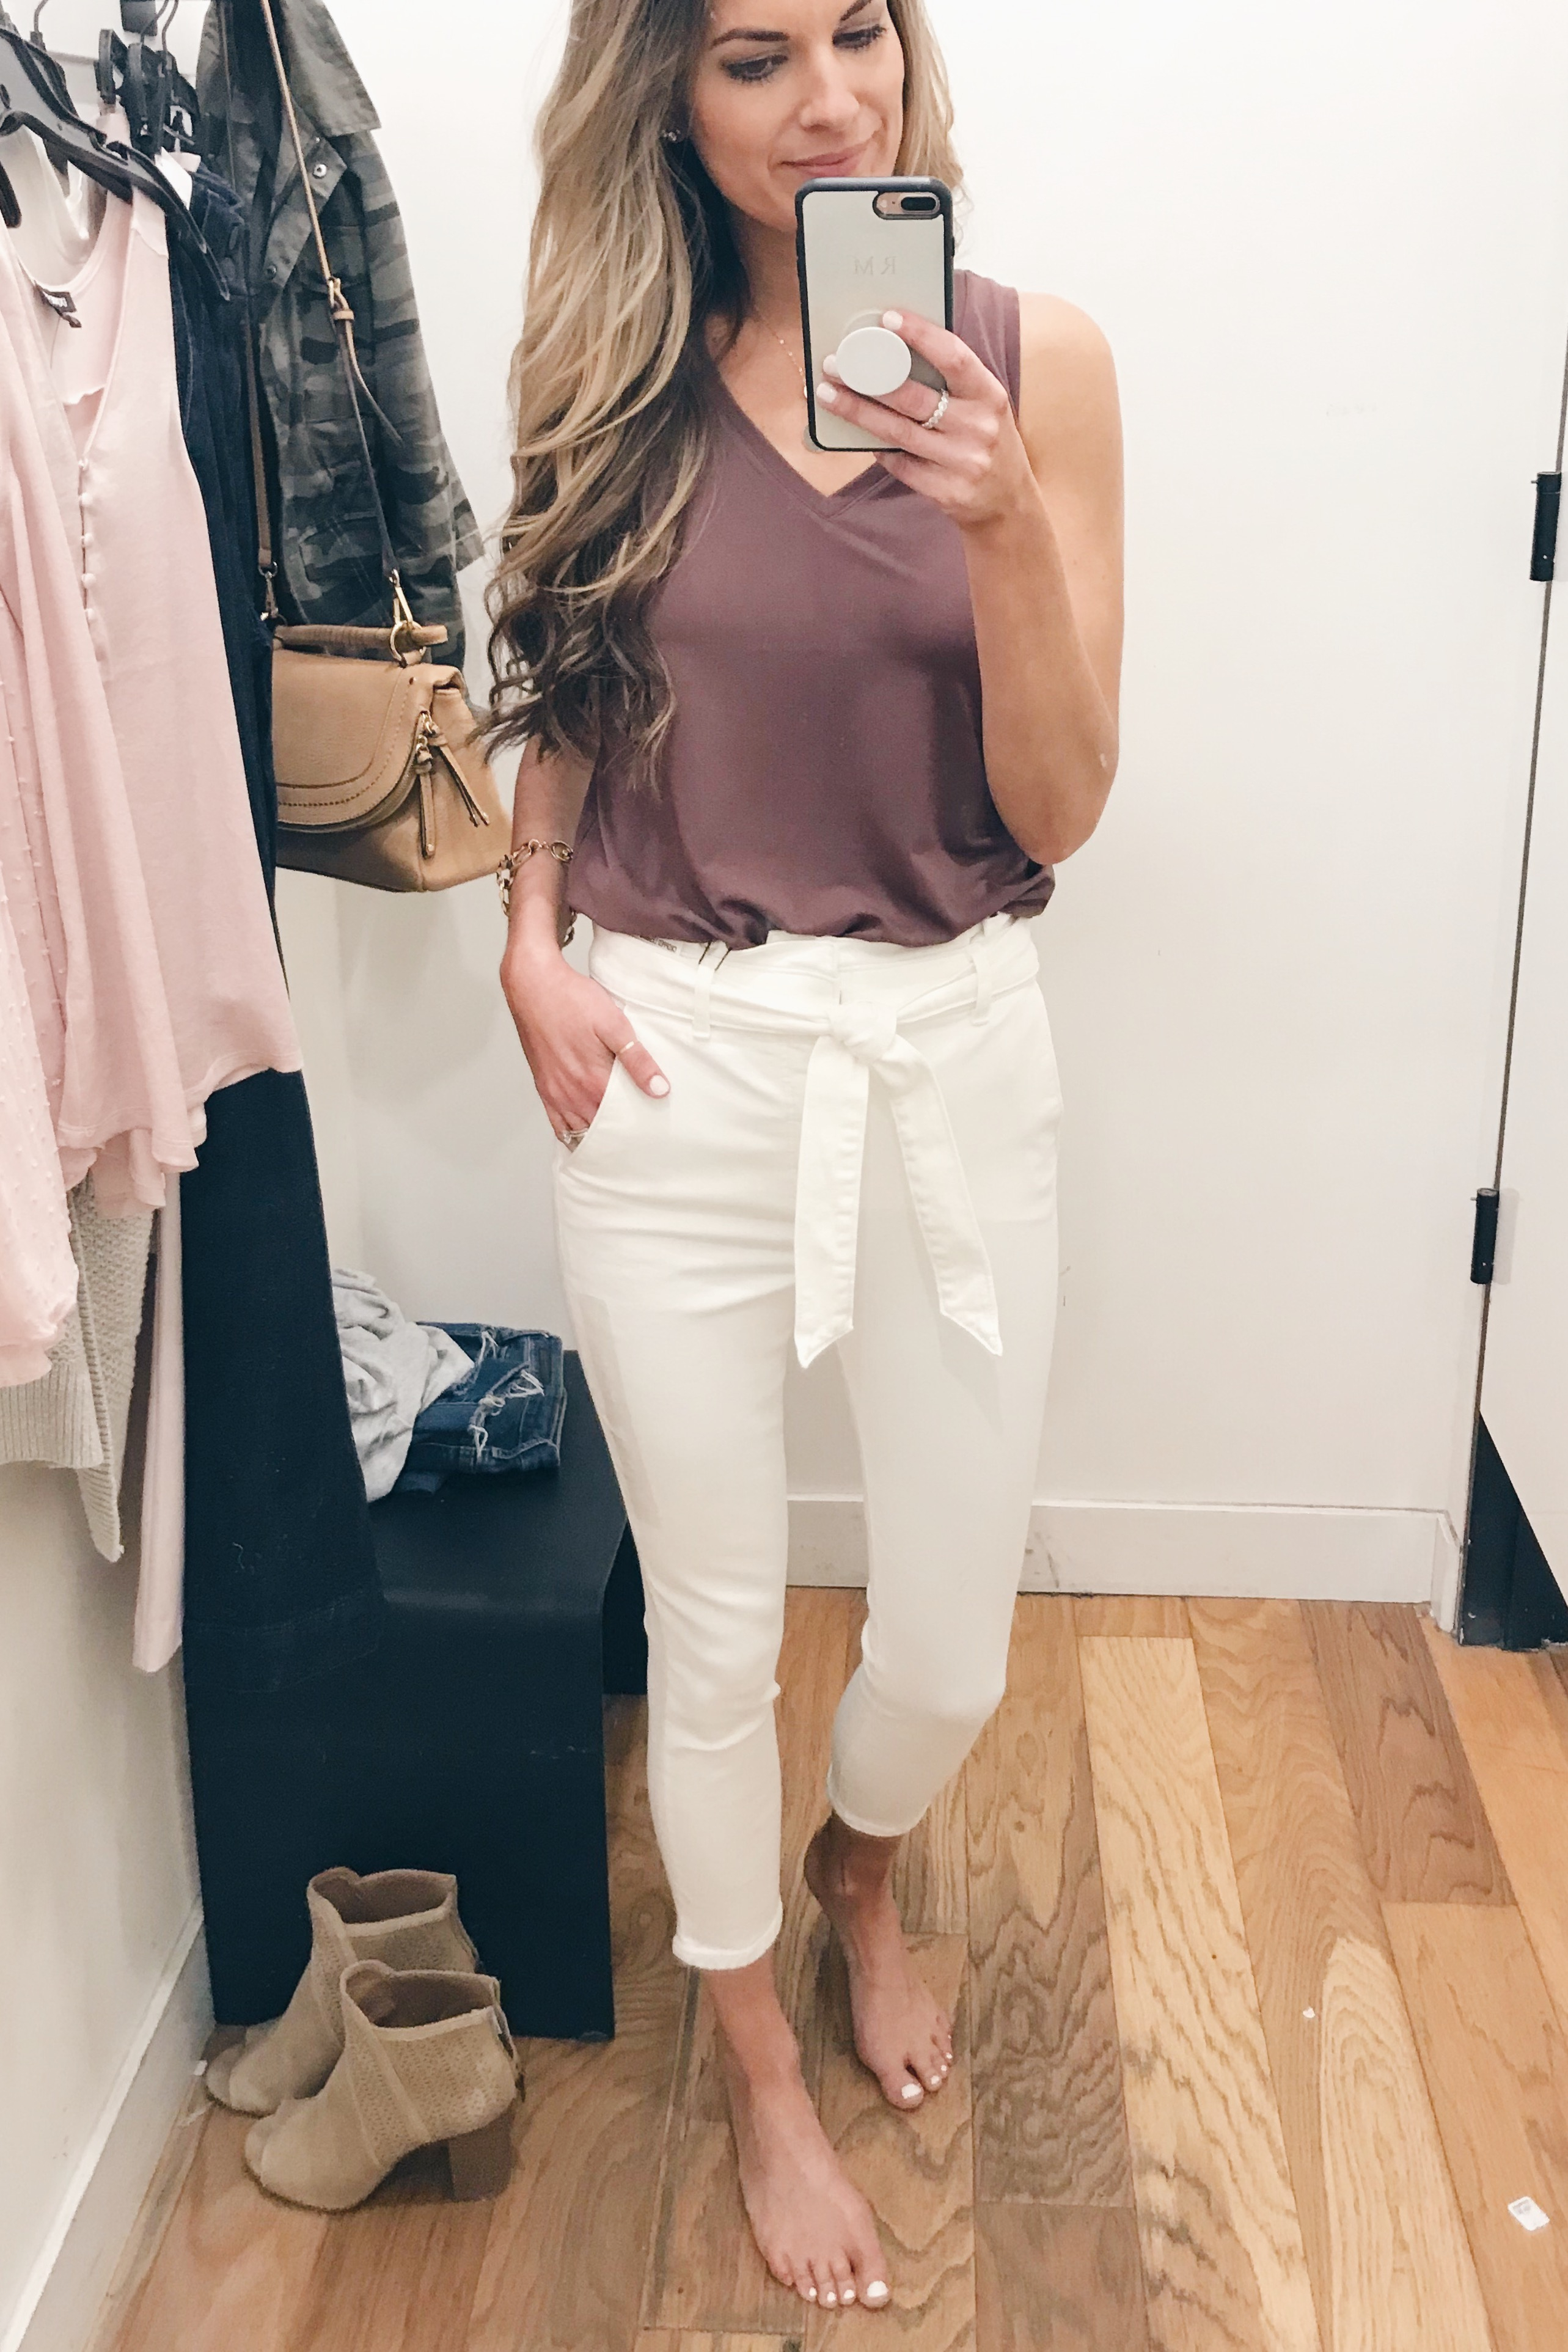 express sale try on march 2019 - belted white pants on Pinteresting Plans blog